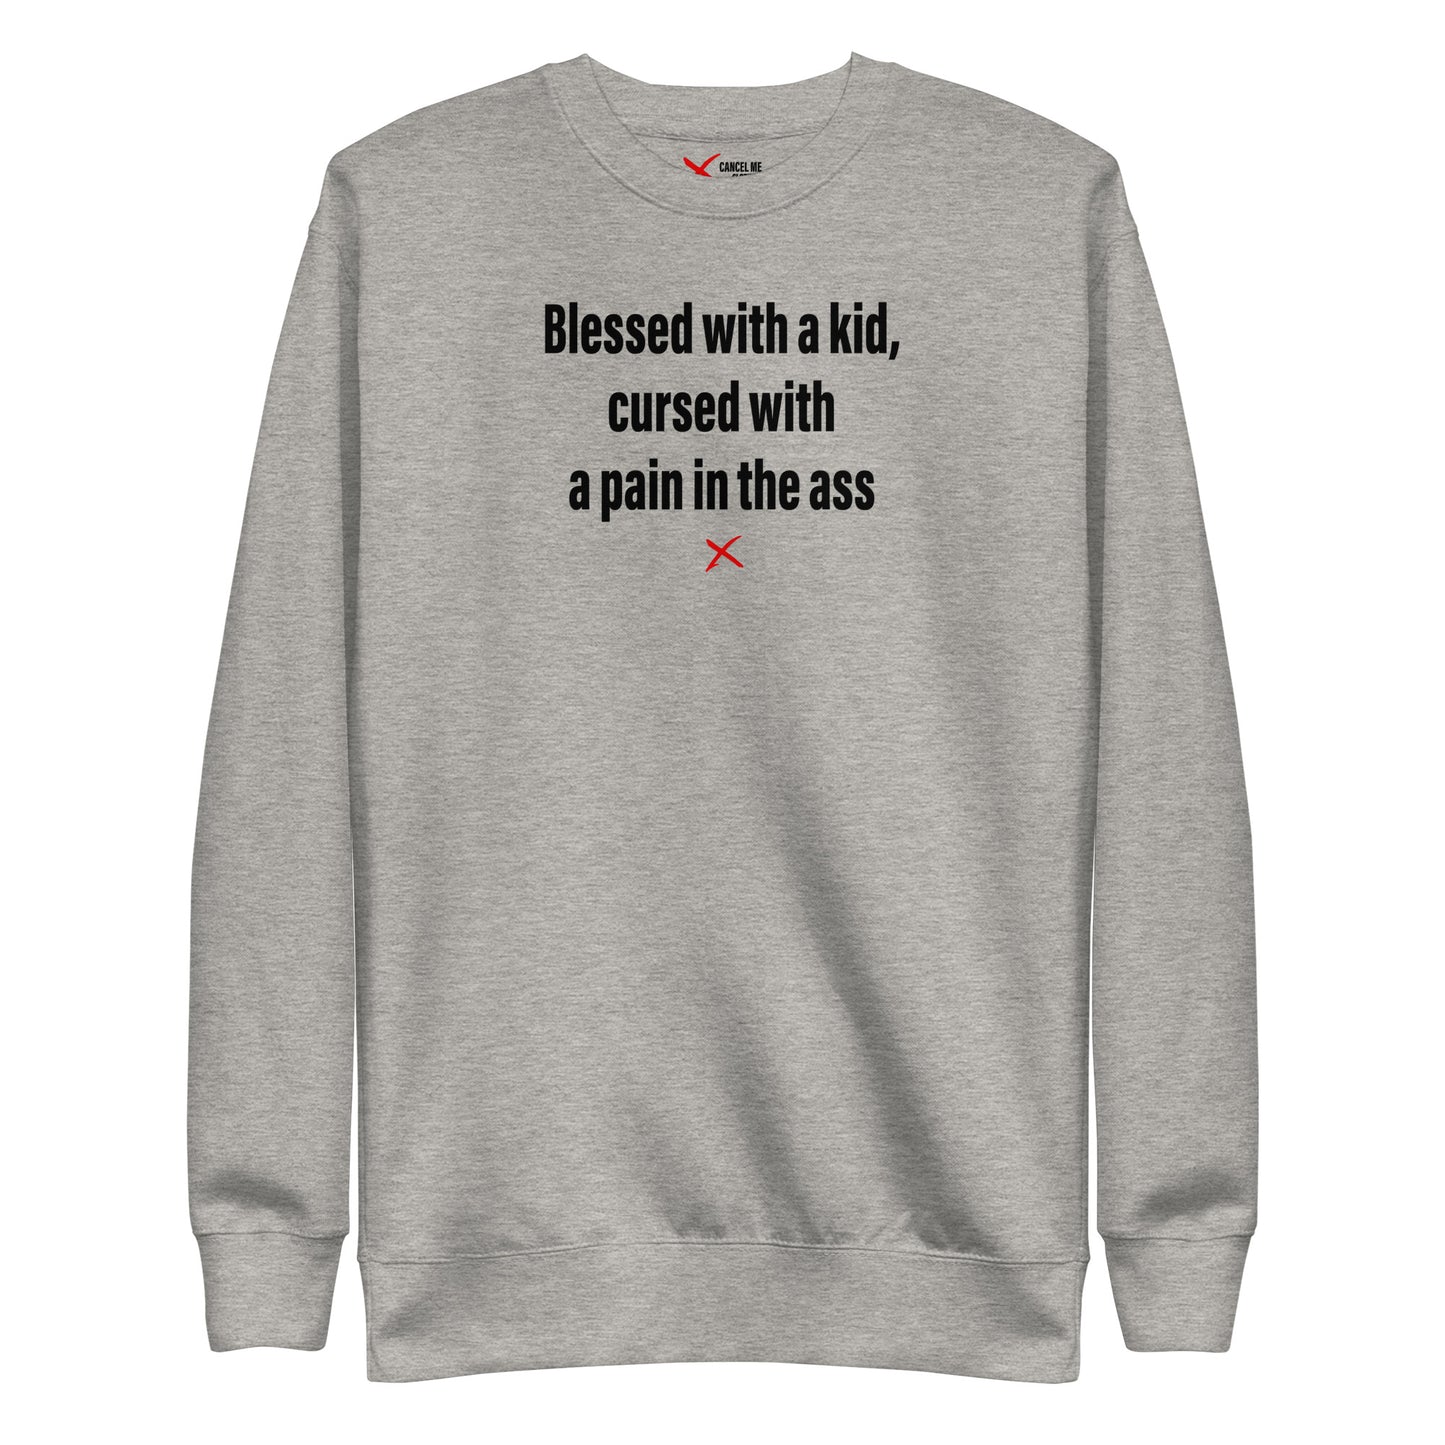 Blessed with a kid, cursed with a pain in the ass - Sweatshirt